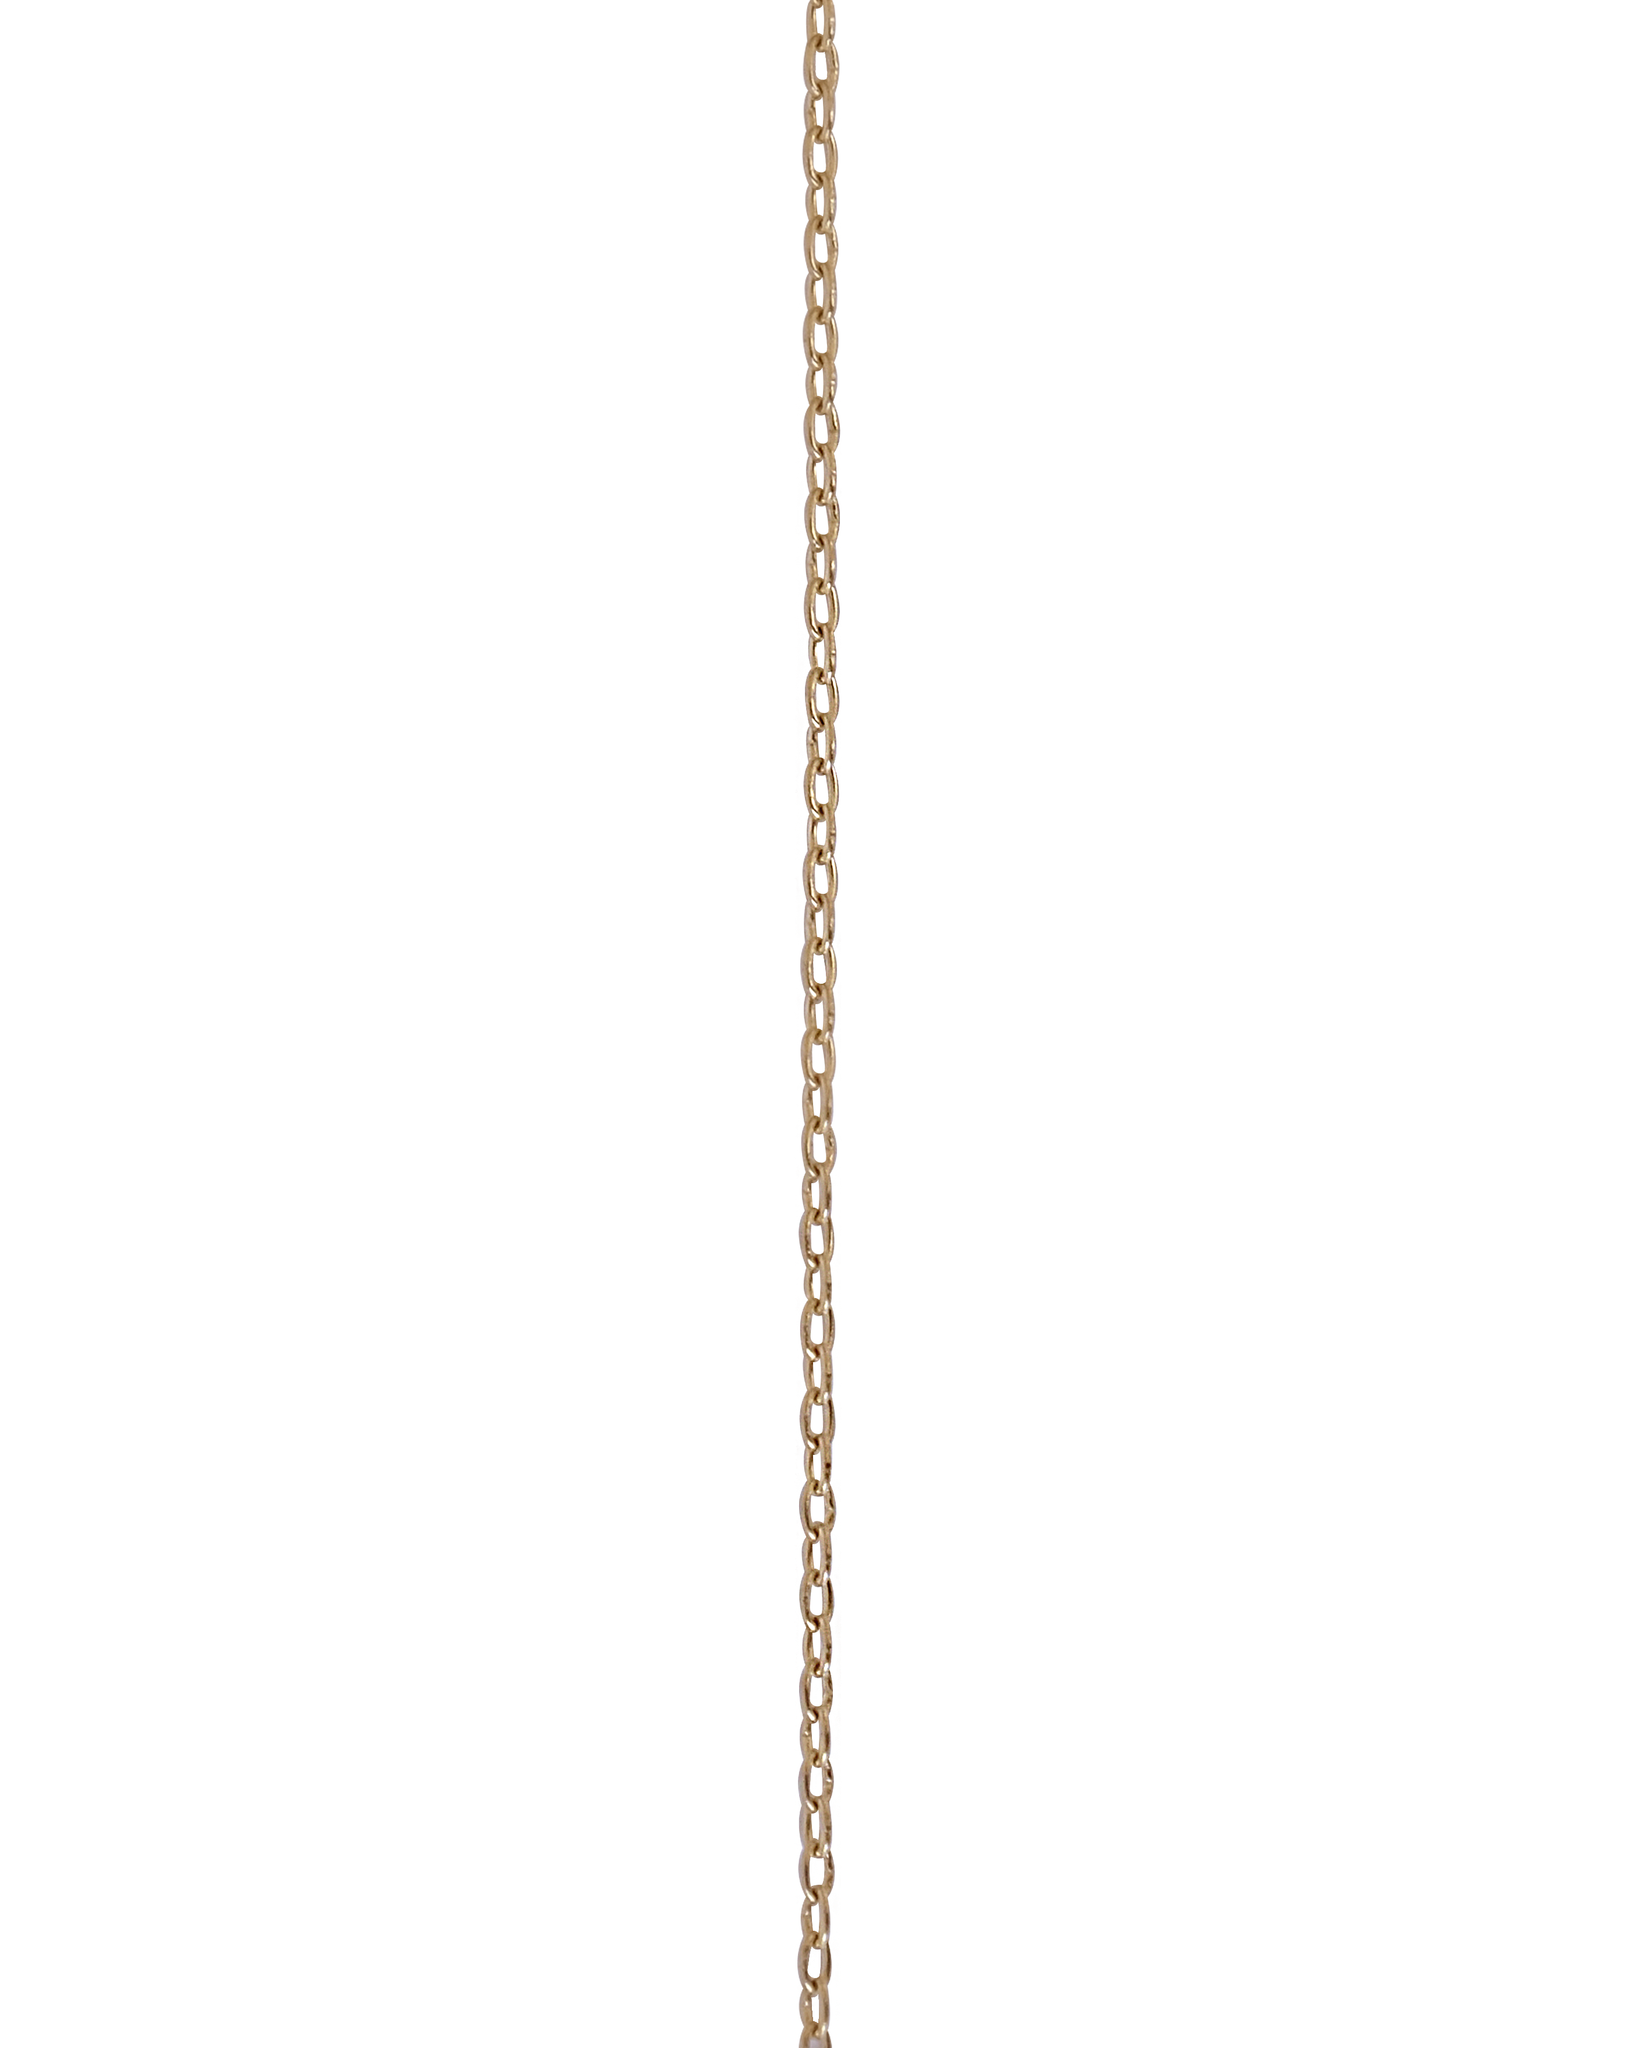 Ava Chain - Solid 14k Gold